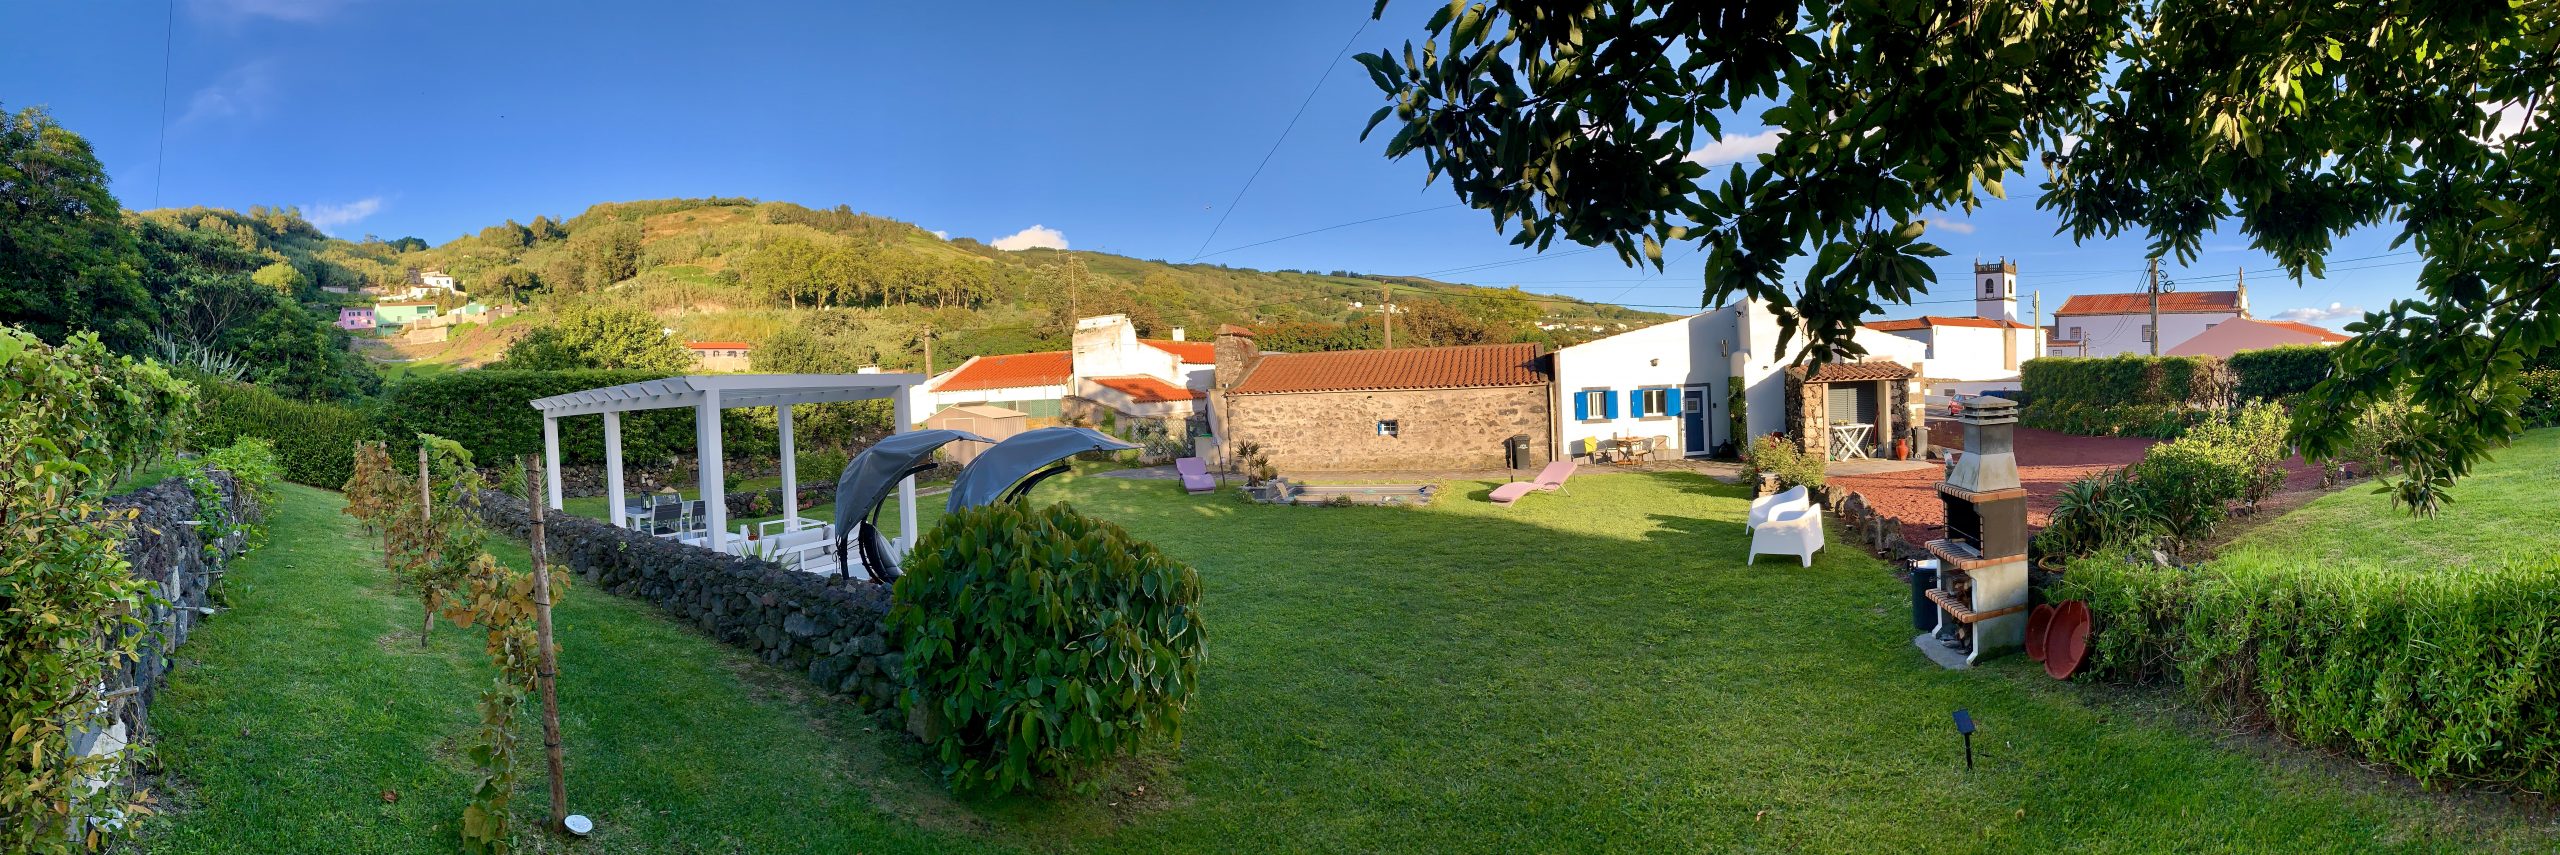 holiday-houses-azores11